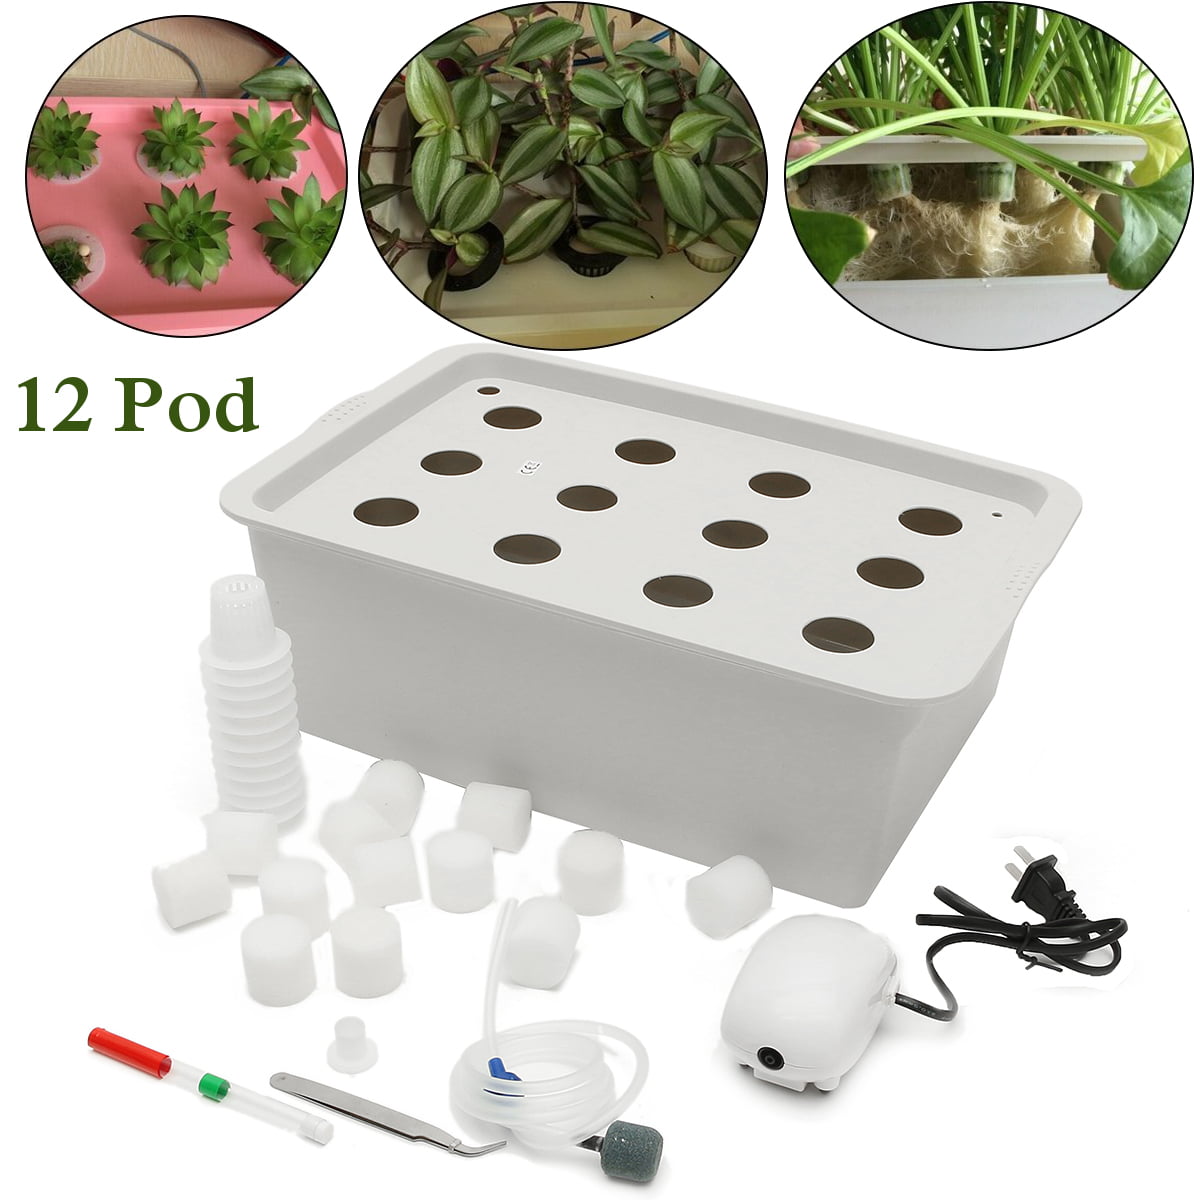 11 Holes Plant Site Hydroponic System Grow Kit Indoor Cabinet Box Set Garden 